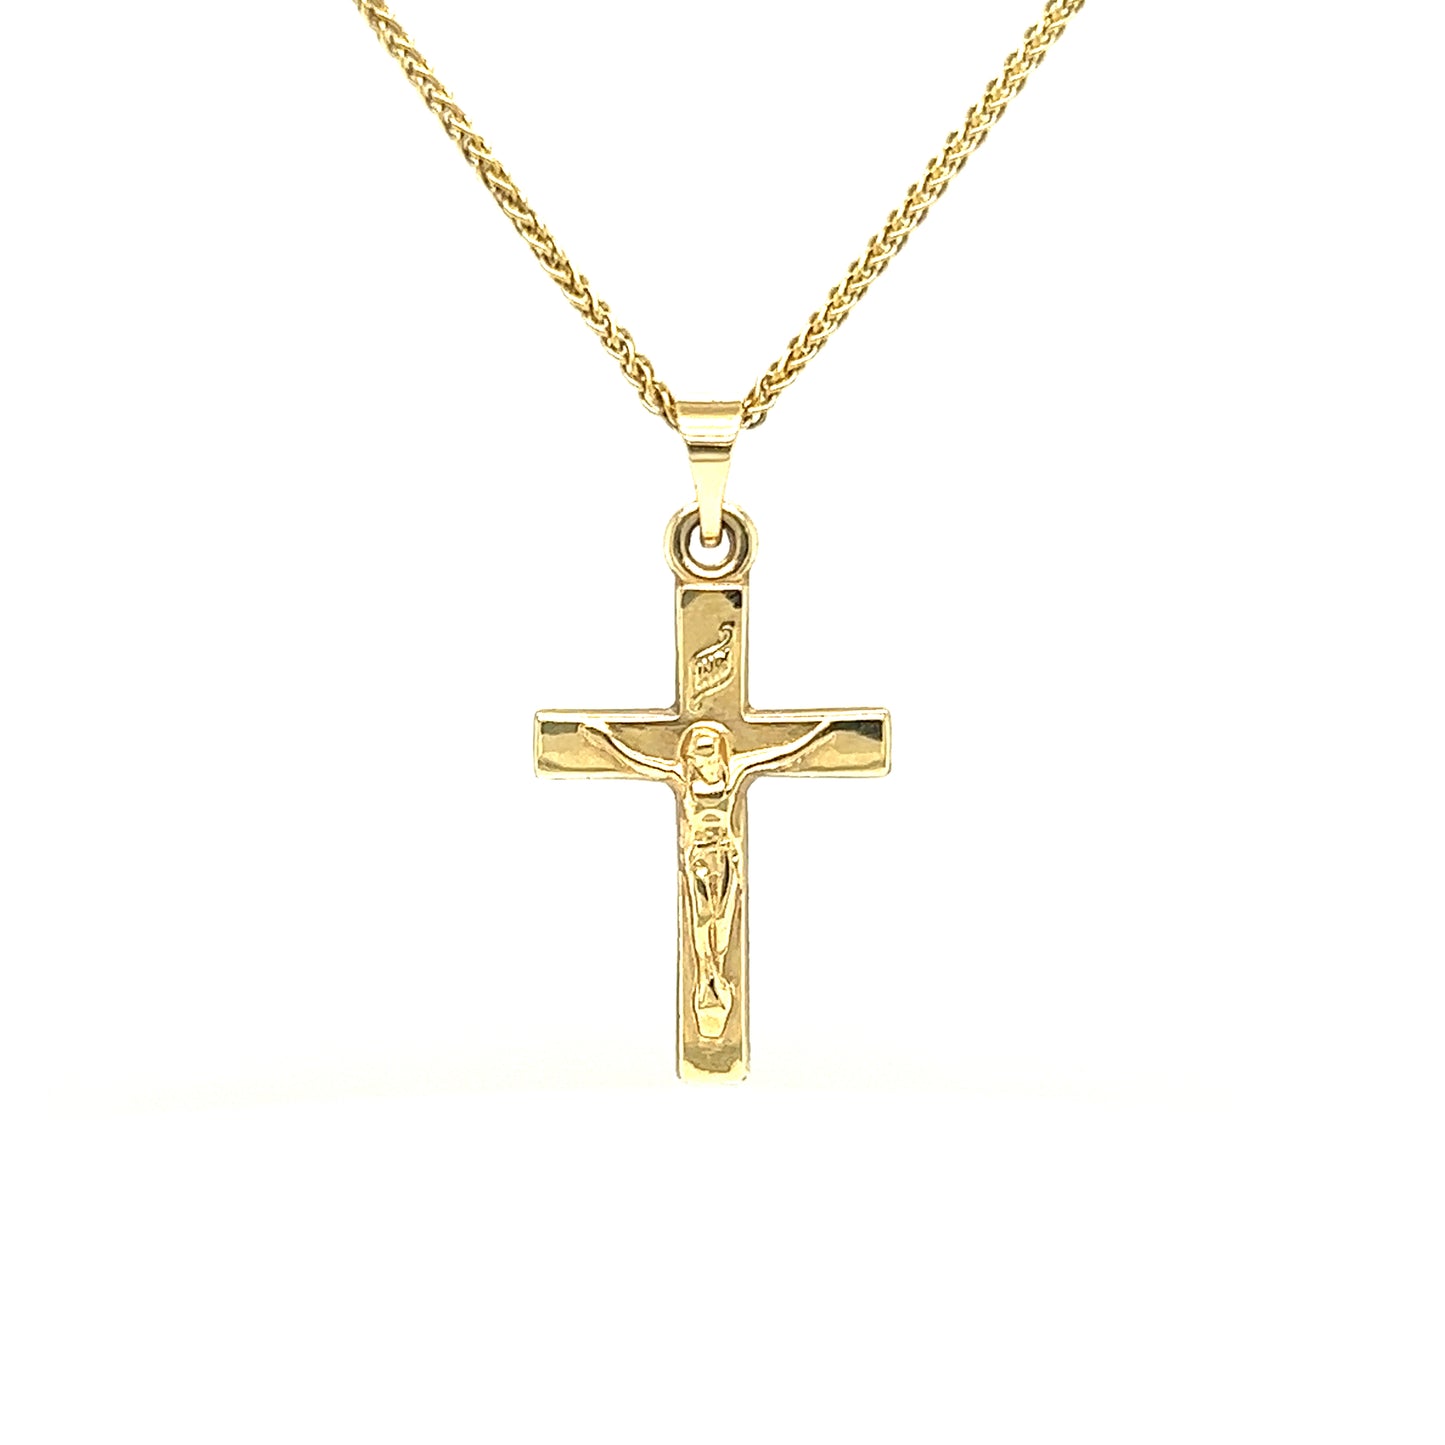 Small Crucifix Pendant in 14K Yellow Gold Pendant and Chain Front View